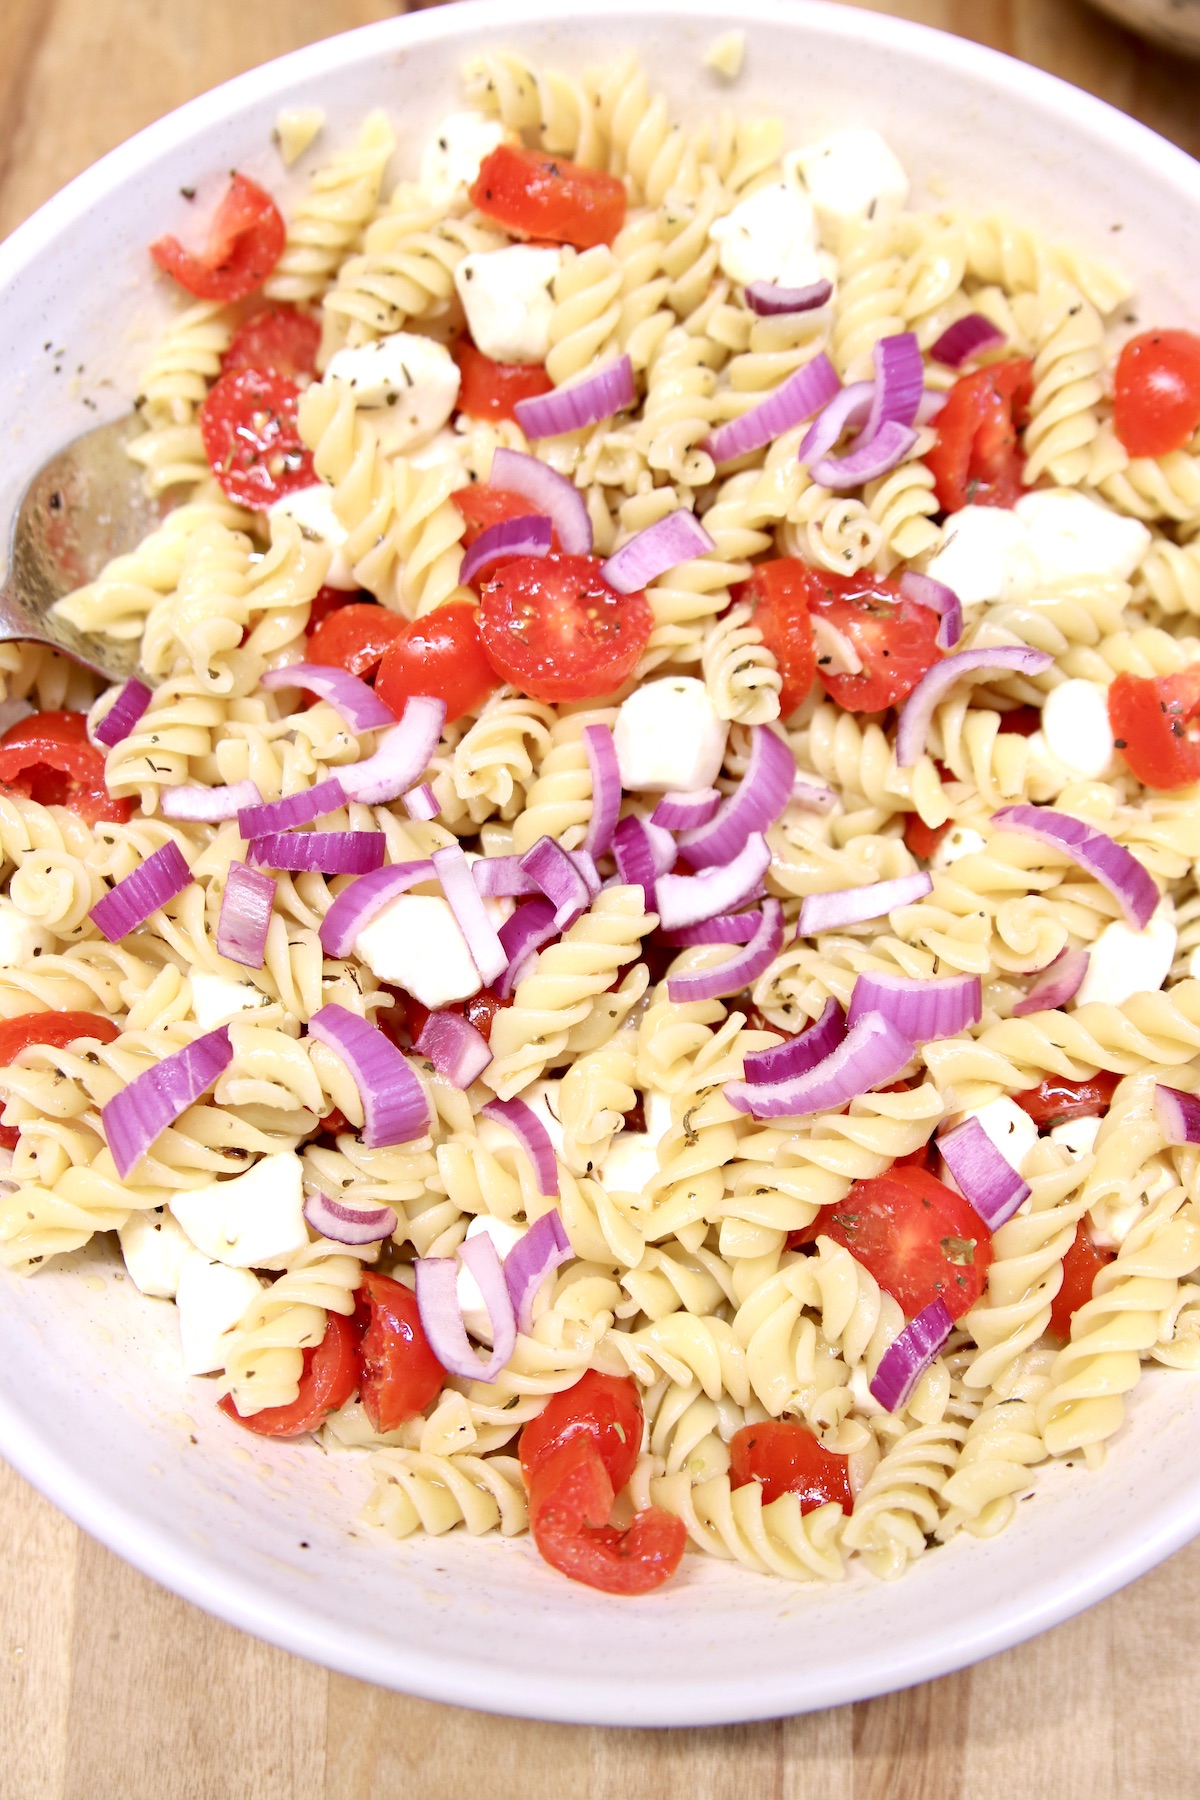 rotini pasta in a bowl with sliced tomatoes, red onion and mozzarella balls